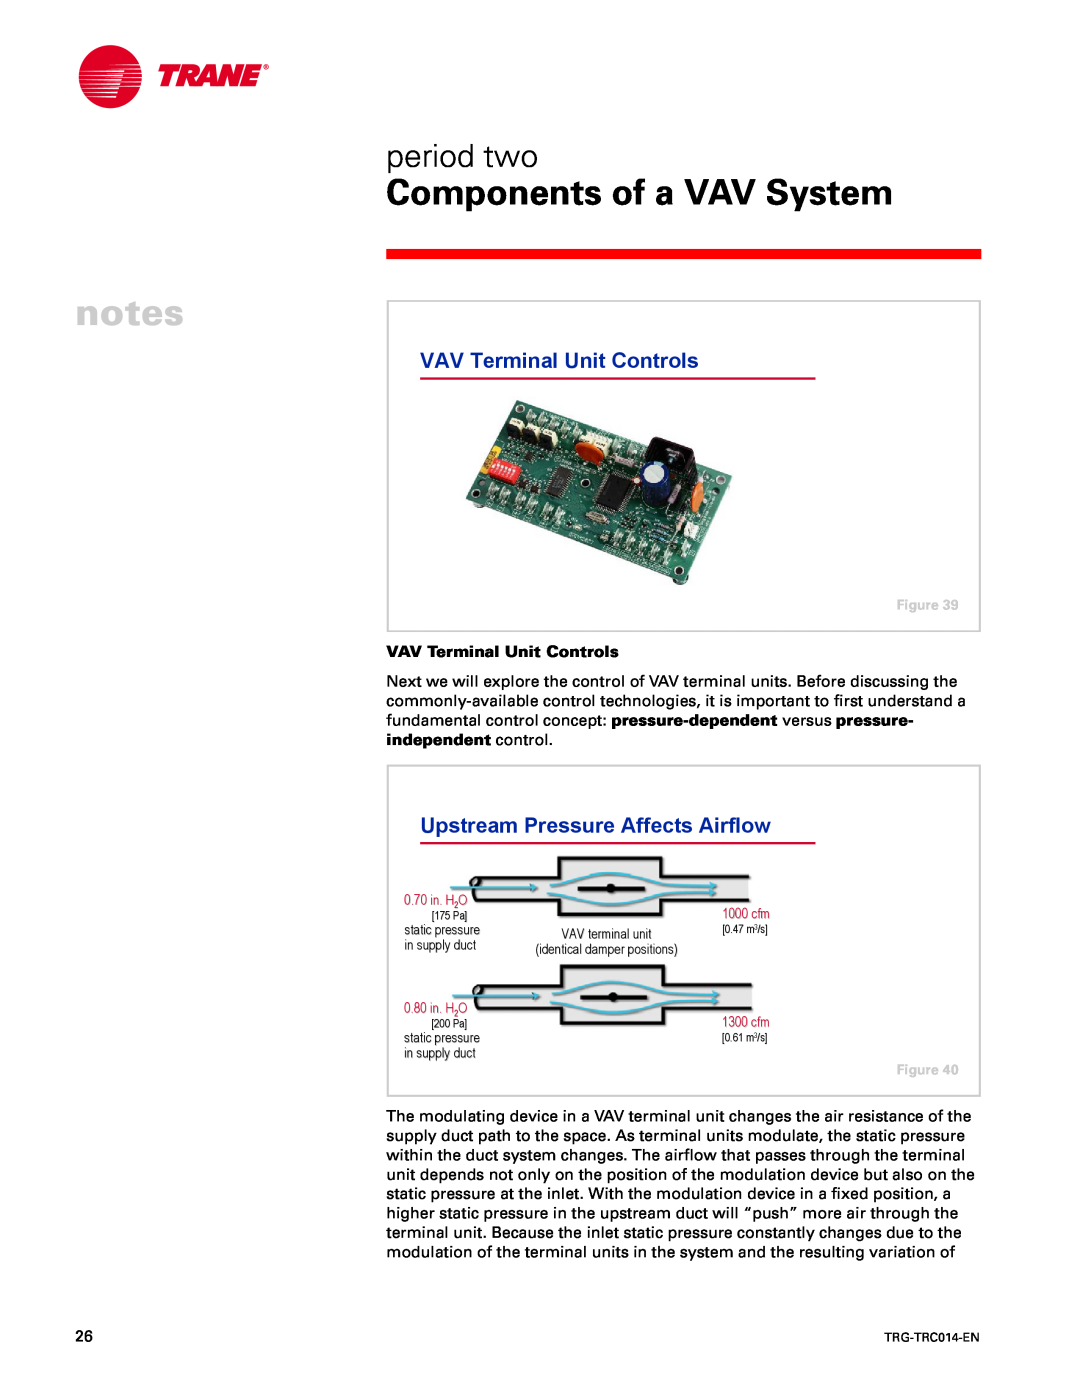 Trane TRG-TRC014-EN VAV Terminal Unit Controls, Upstream Pressure Affects Airflow, Components of a VAV System, period two 